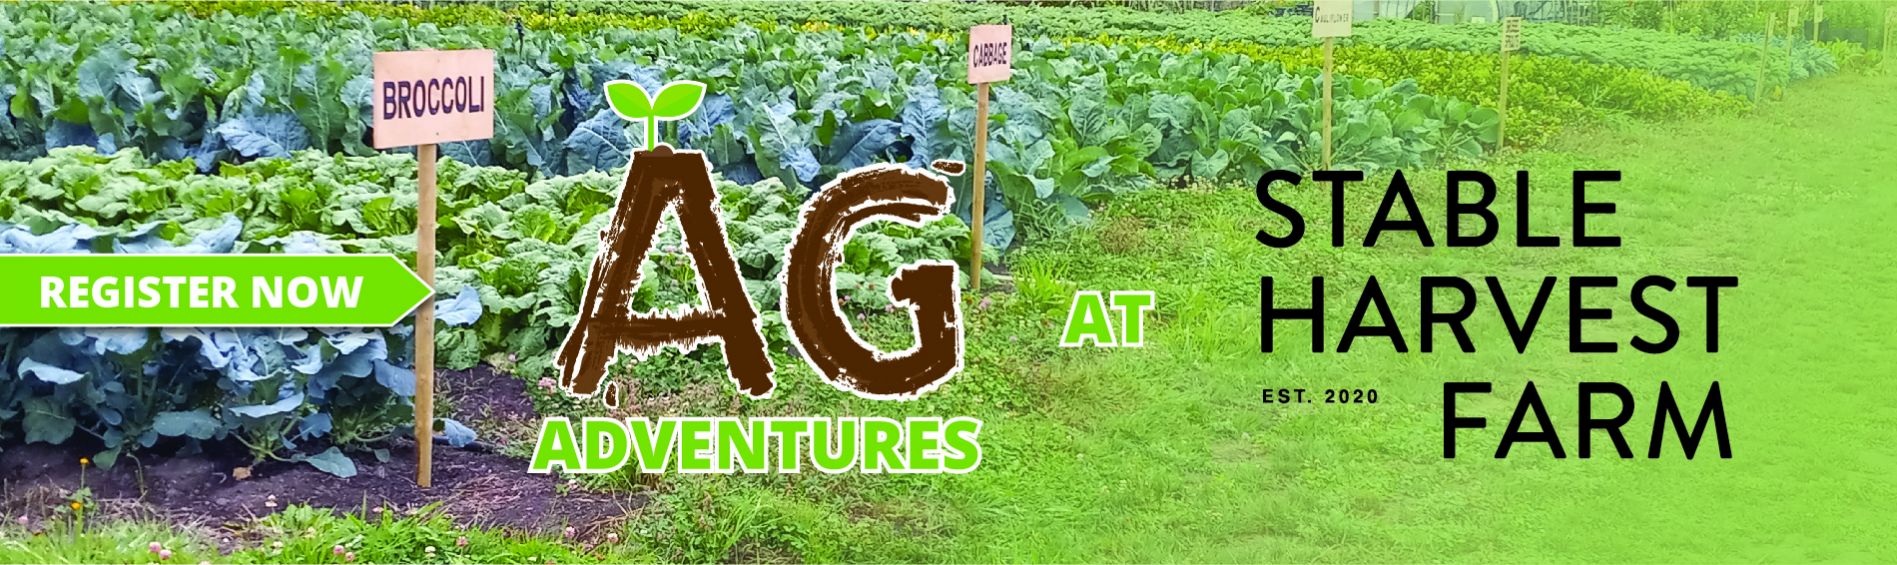 Ag Adventures at Stable Harvest Farms